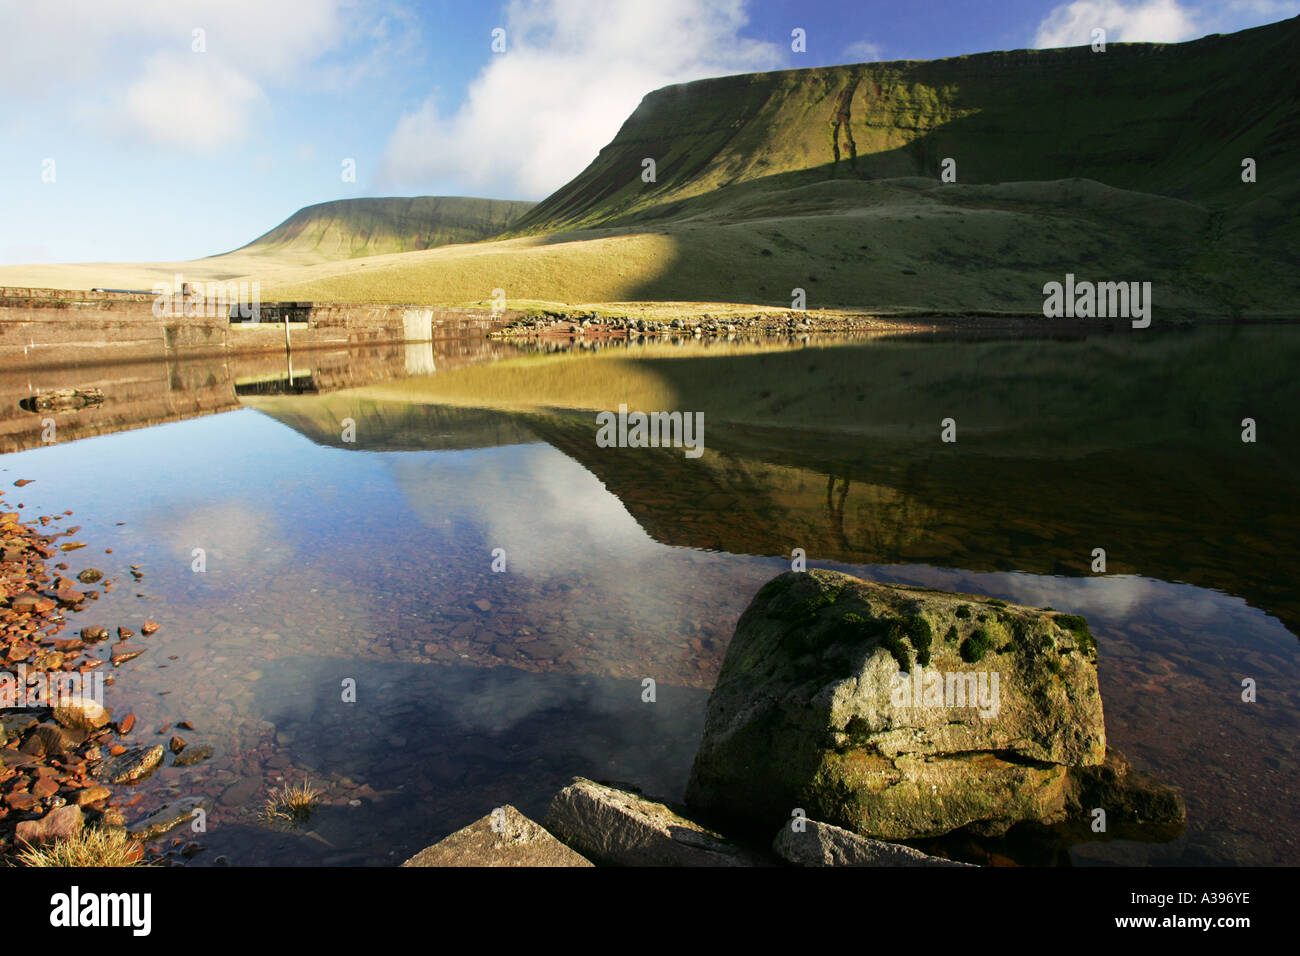 The Carmarthen Fan reflected in Llyn y Fan Fach magic lake, a popular tourist attraction Brecon Beacons national park Mid Wales Stock Photo